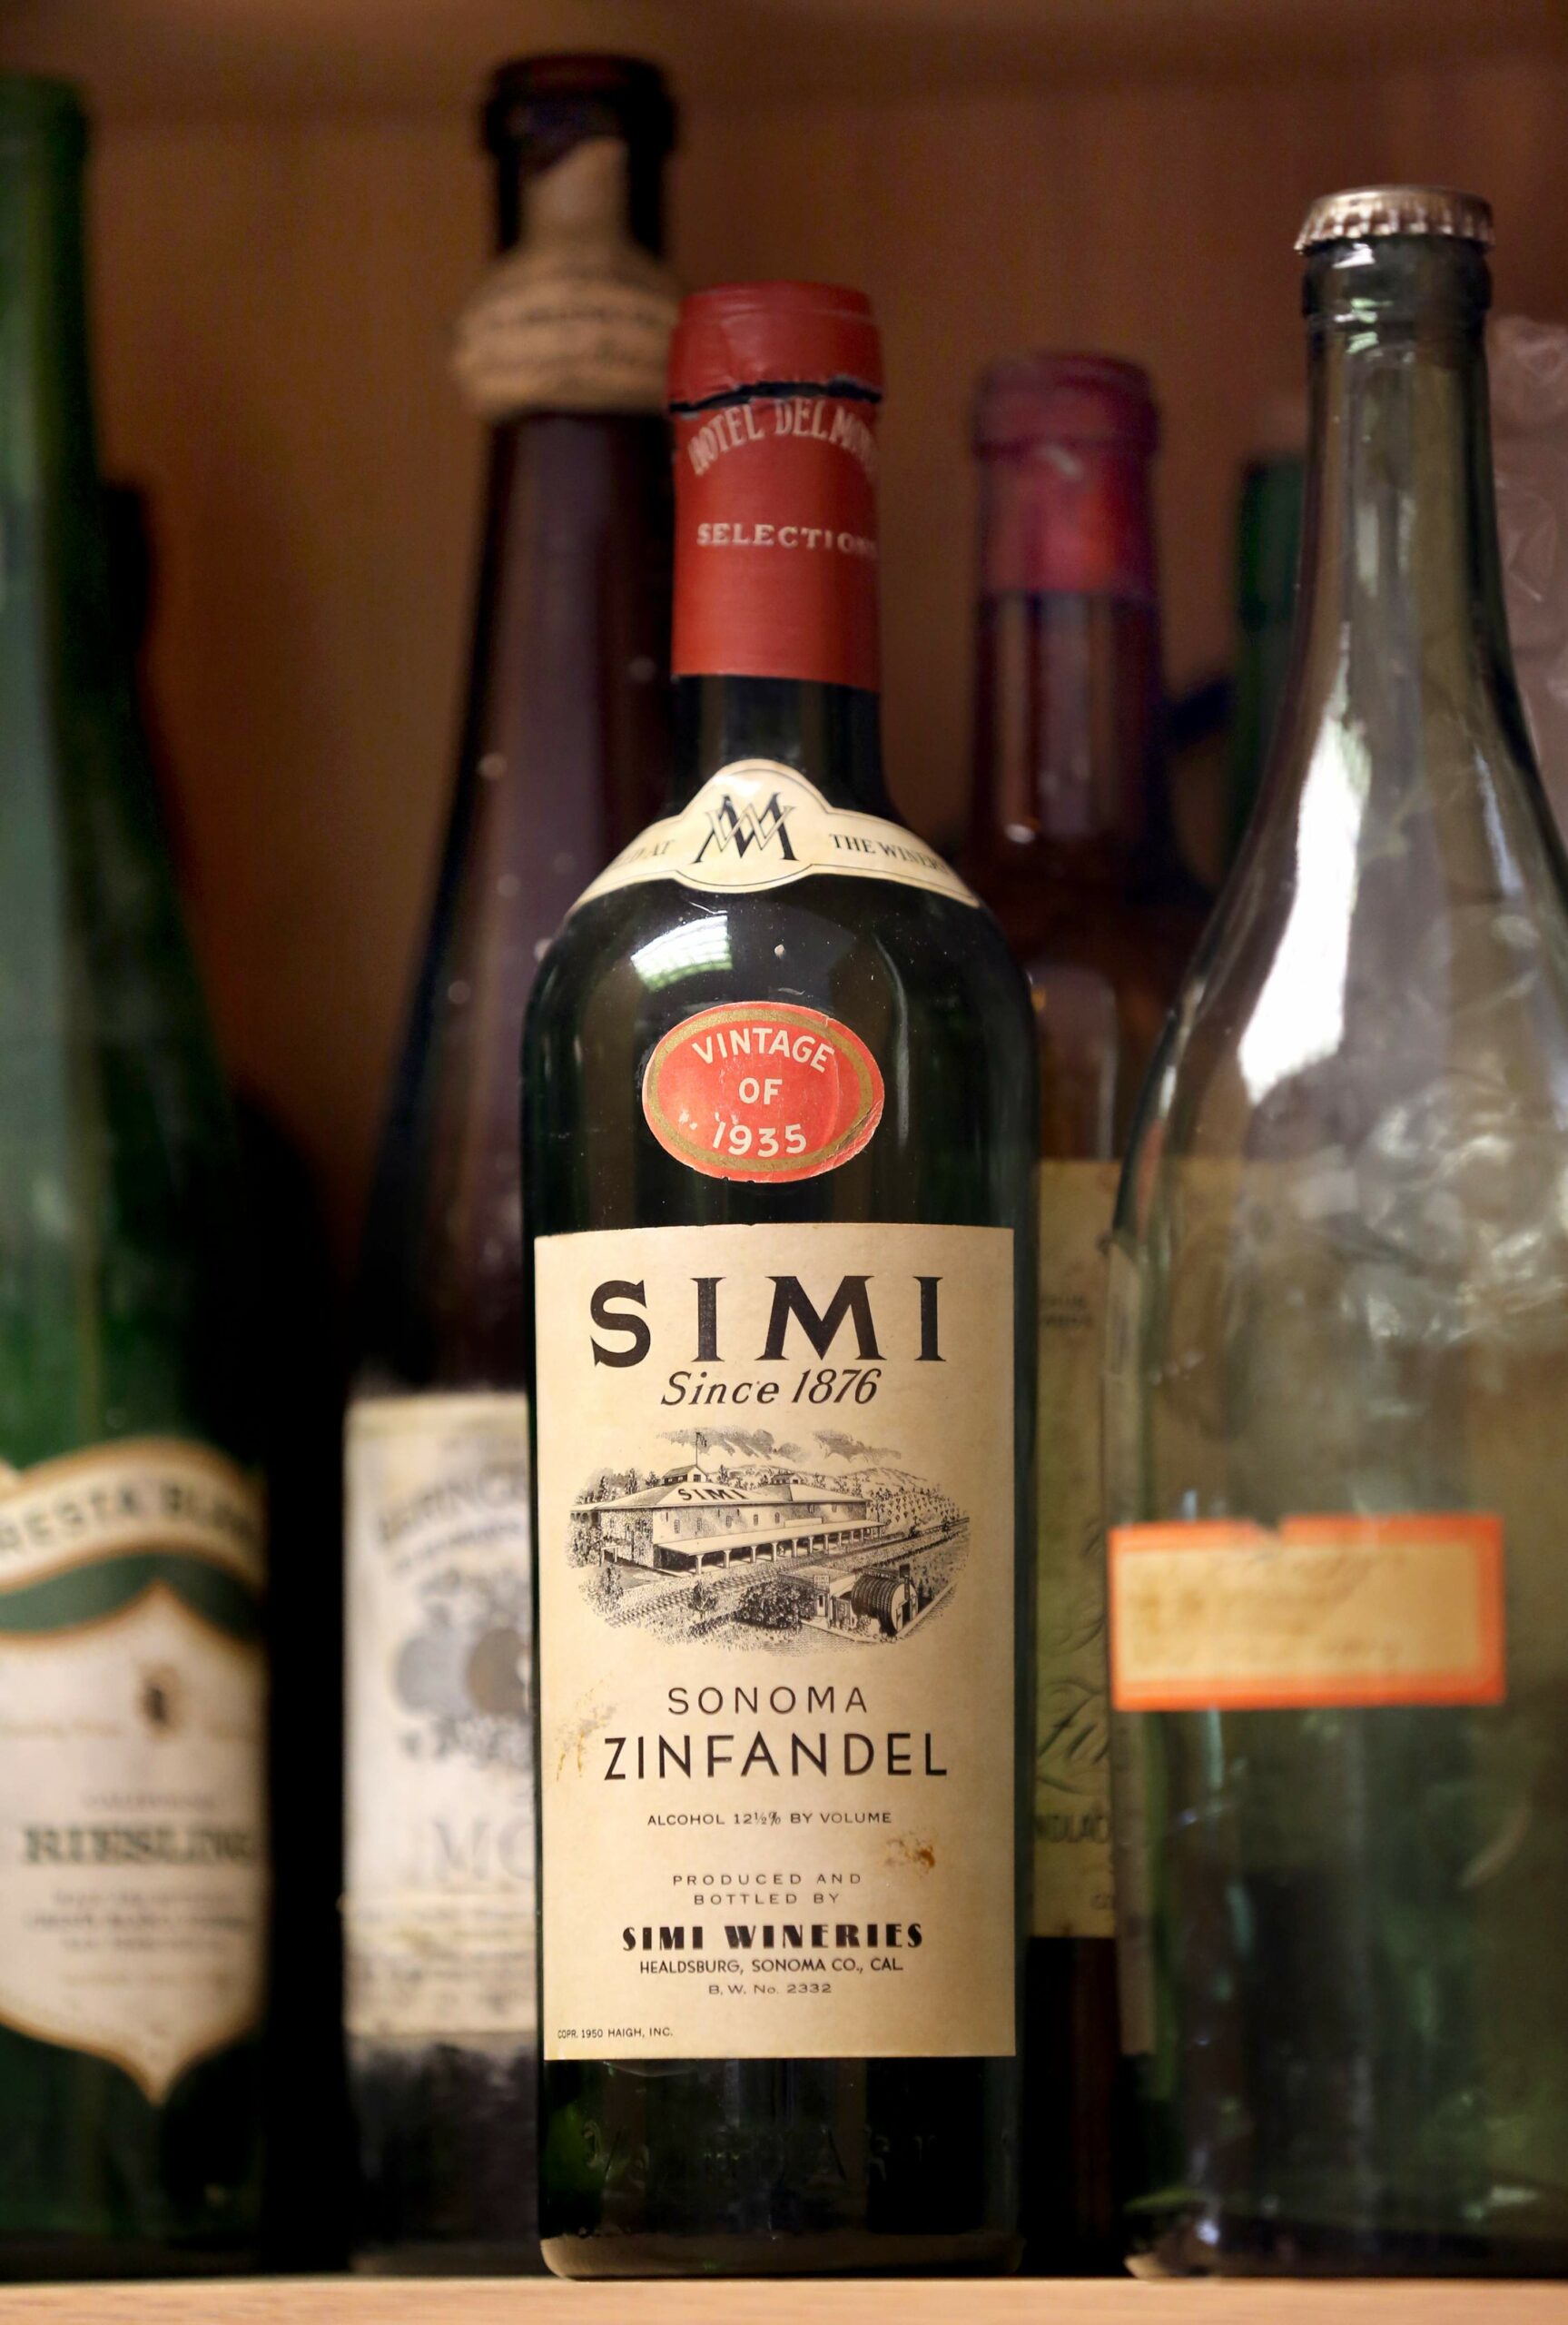 A bottle of 1935 zinfandel from Simi Winery in a collection of vintage wine bottles at the Sonoma County Wine Library in Healdsburg on Tuesday, March 19, 2019. (BETH SCHLANKER/ The Press Democrat)